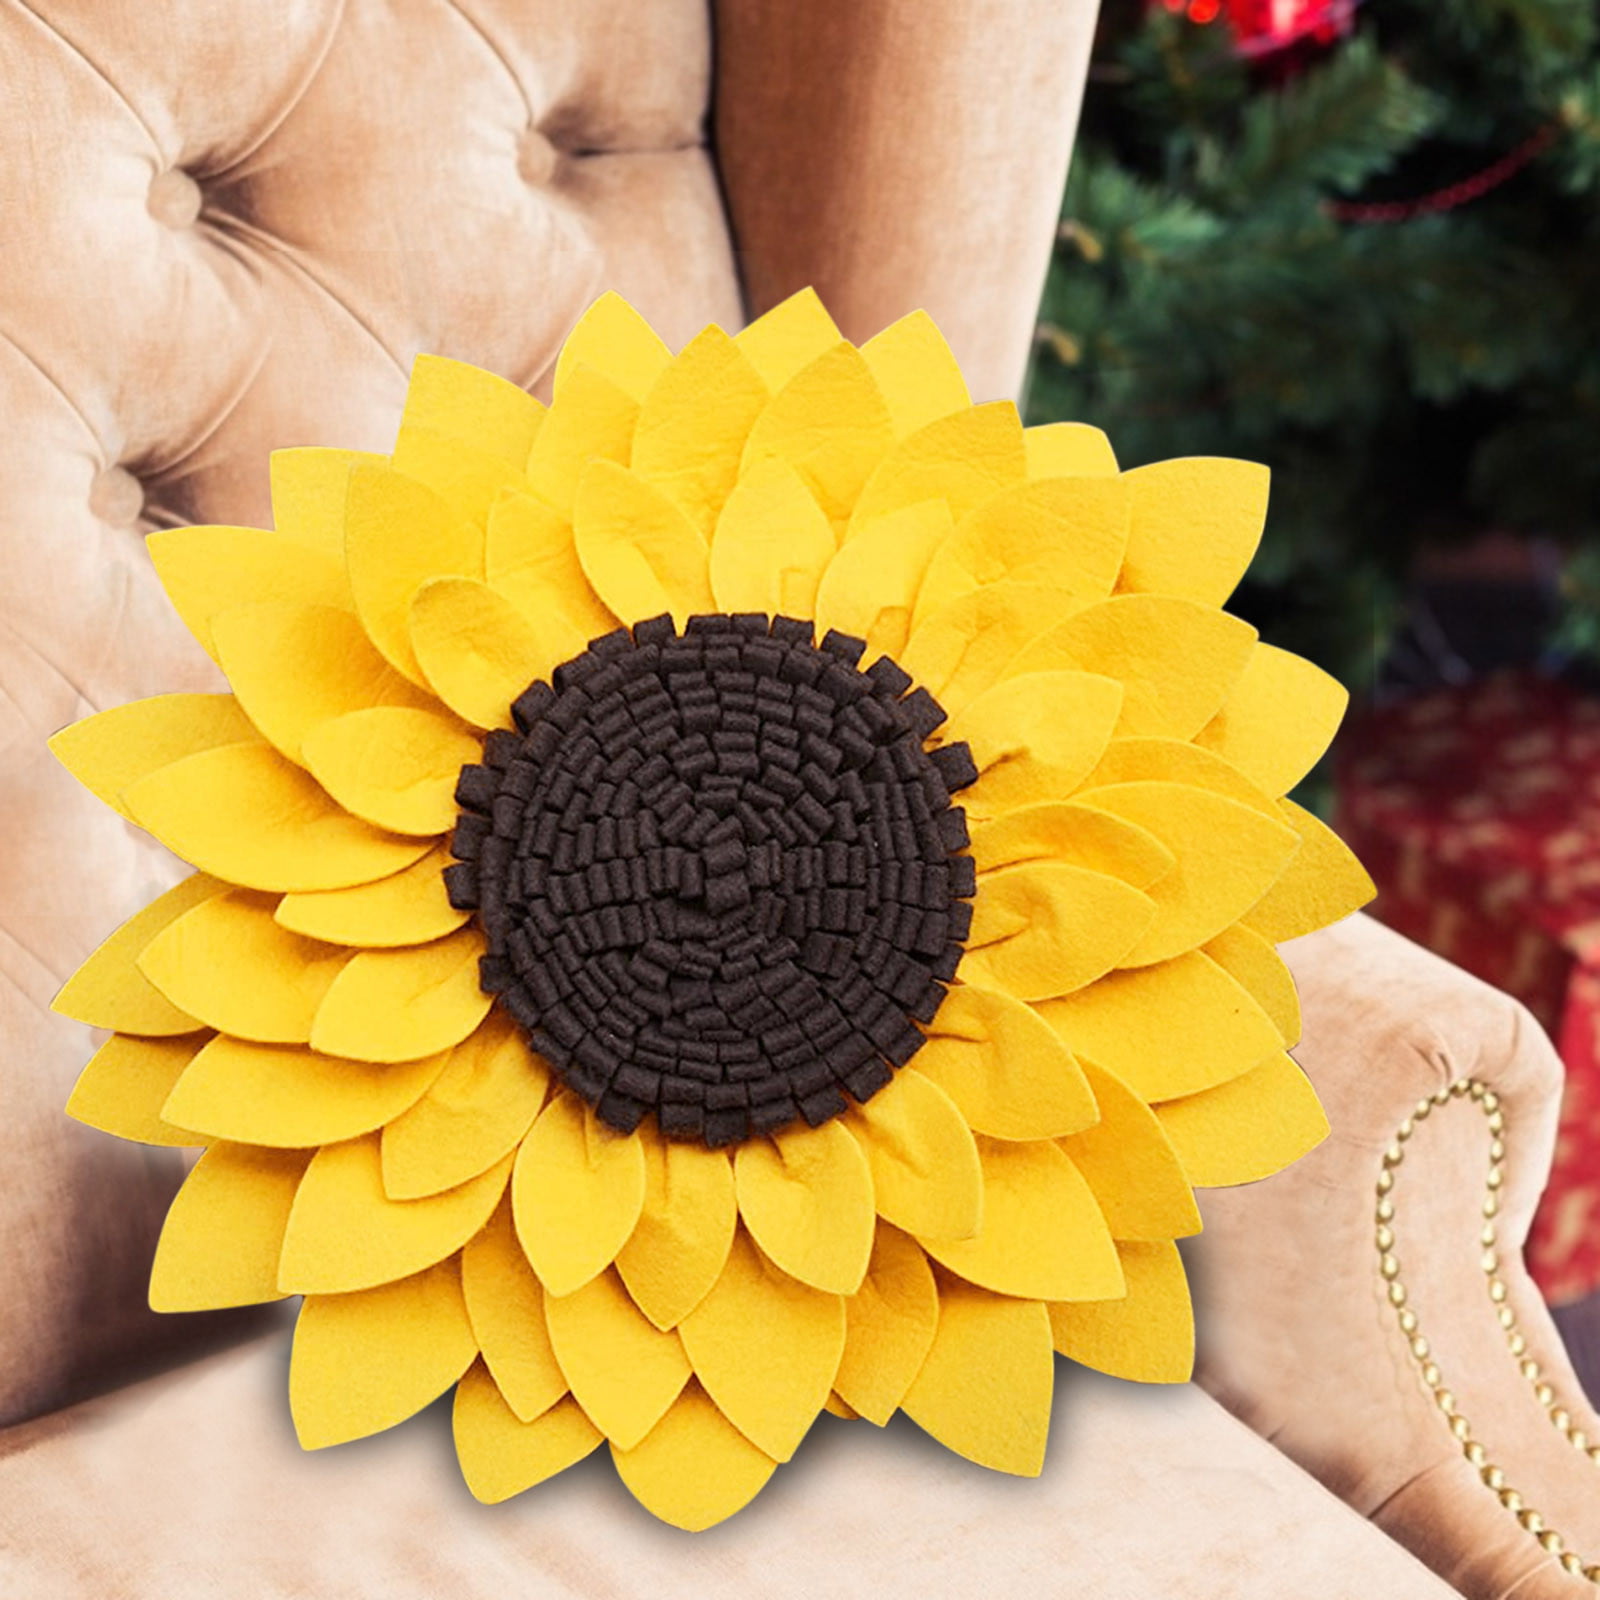 Multicolor 18x18 Sunflower Gifts & Accessories Sister-Gardening Field Sunflower Throw Pillow 